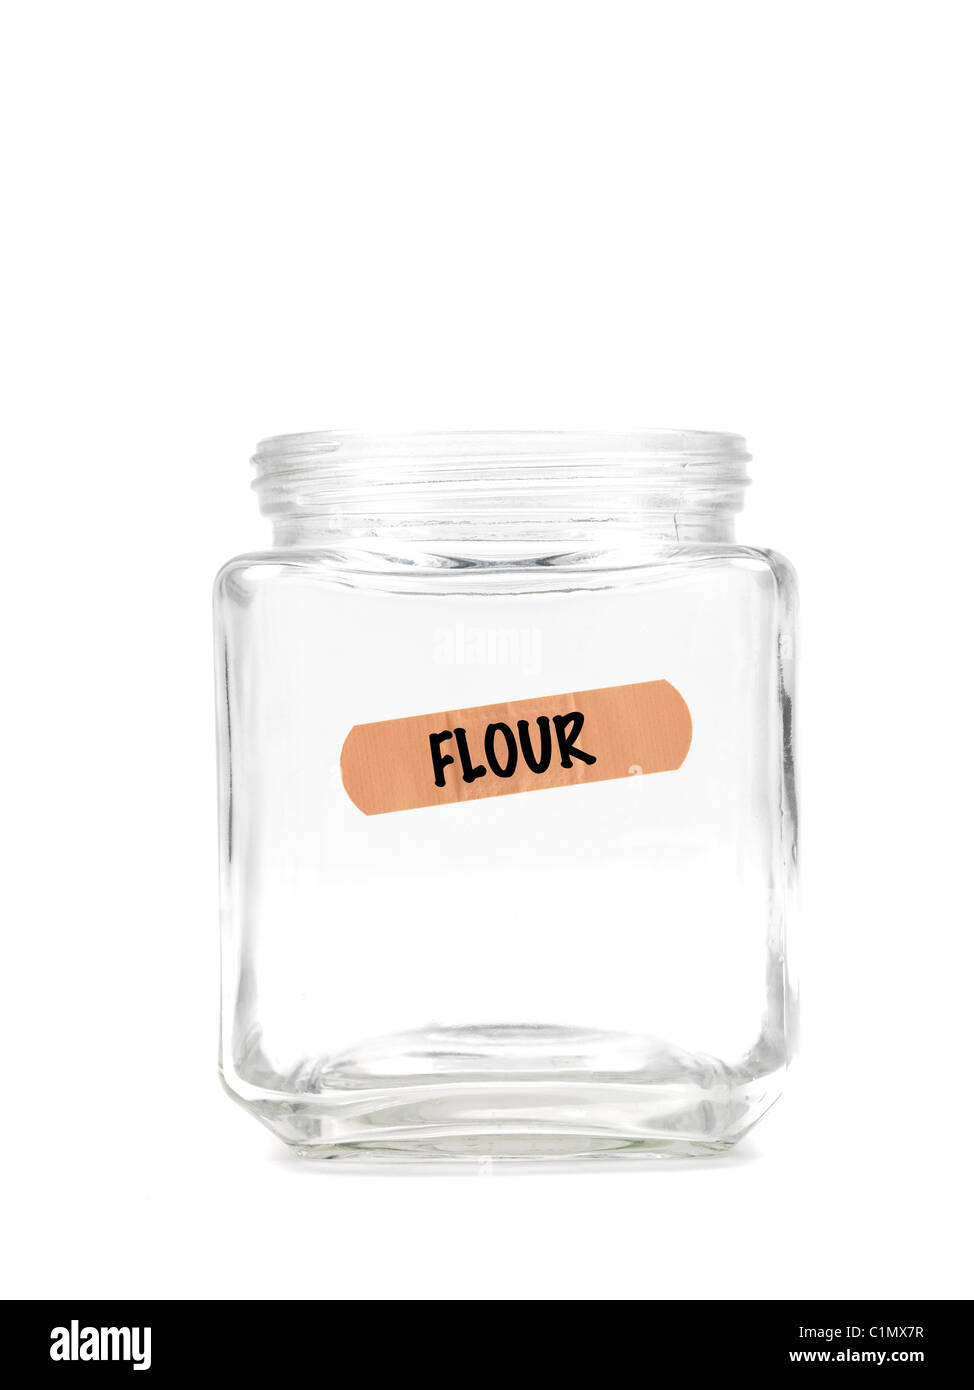 An empty jar with a flour label isolated against a white background Stock Photo